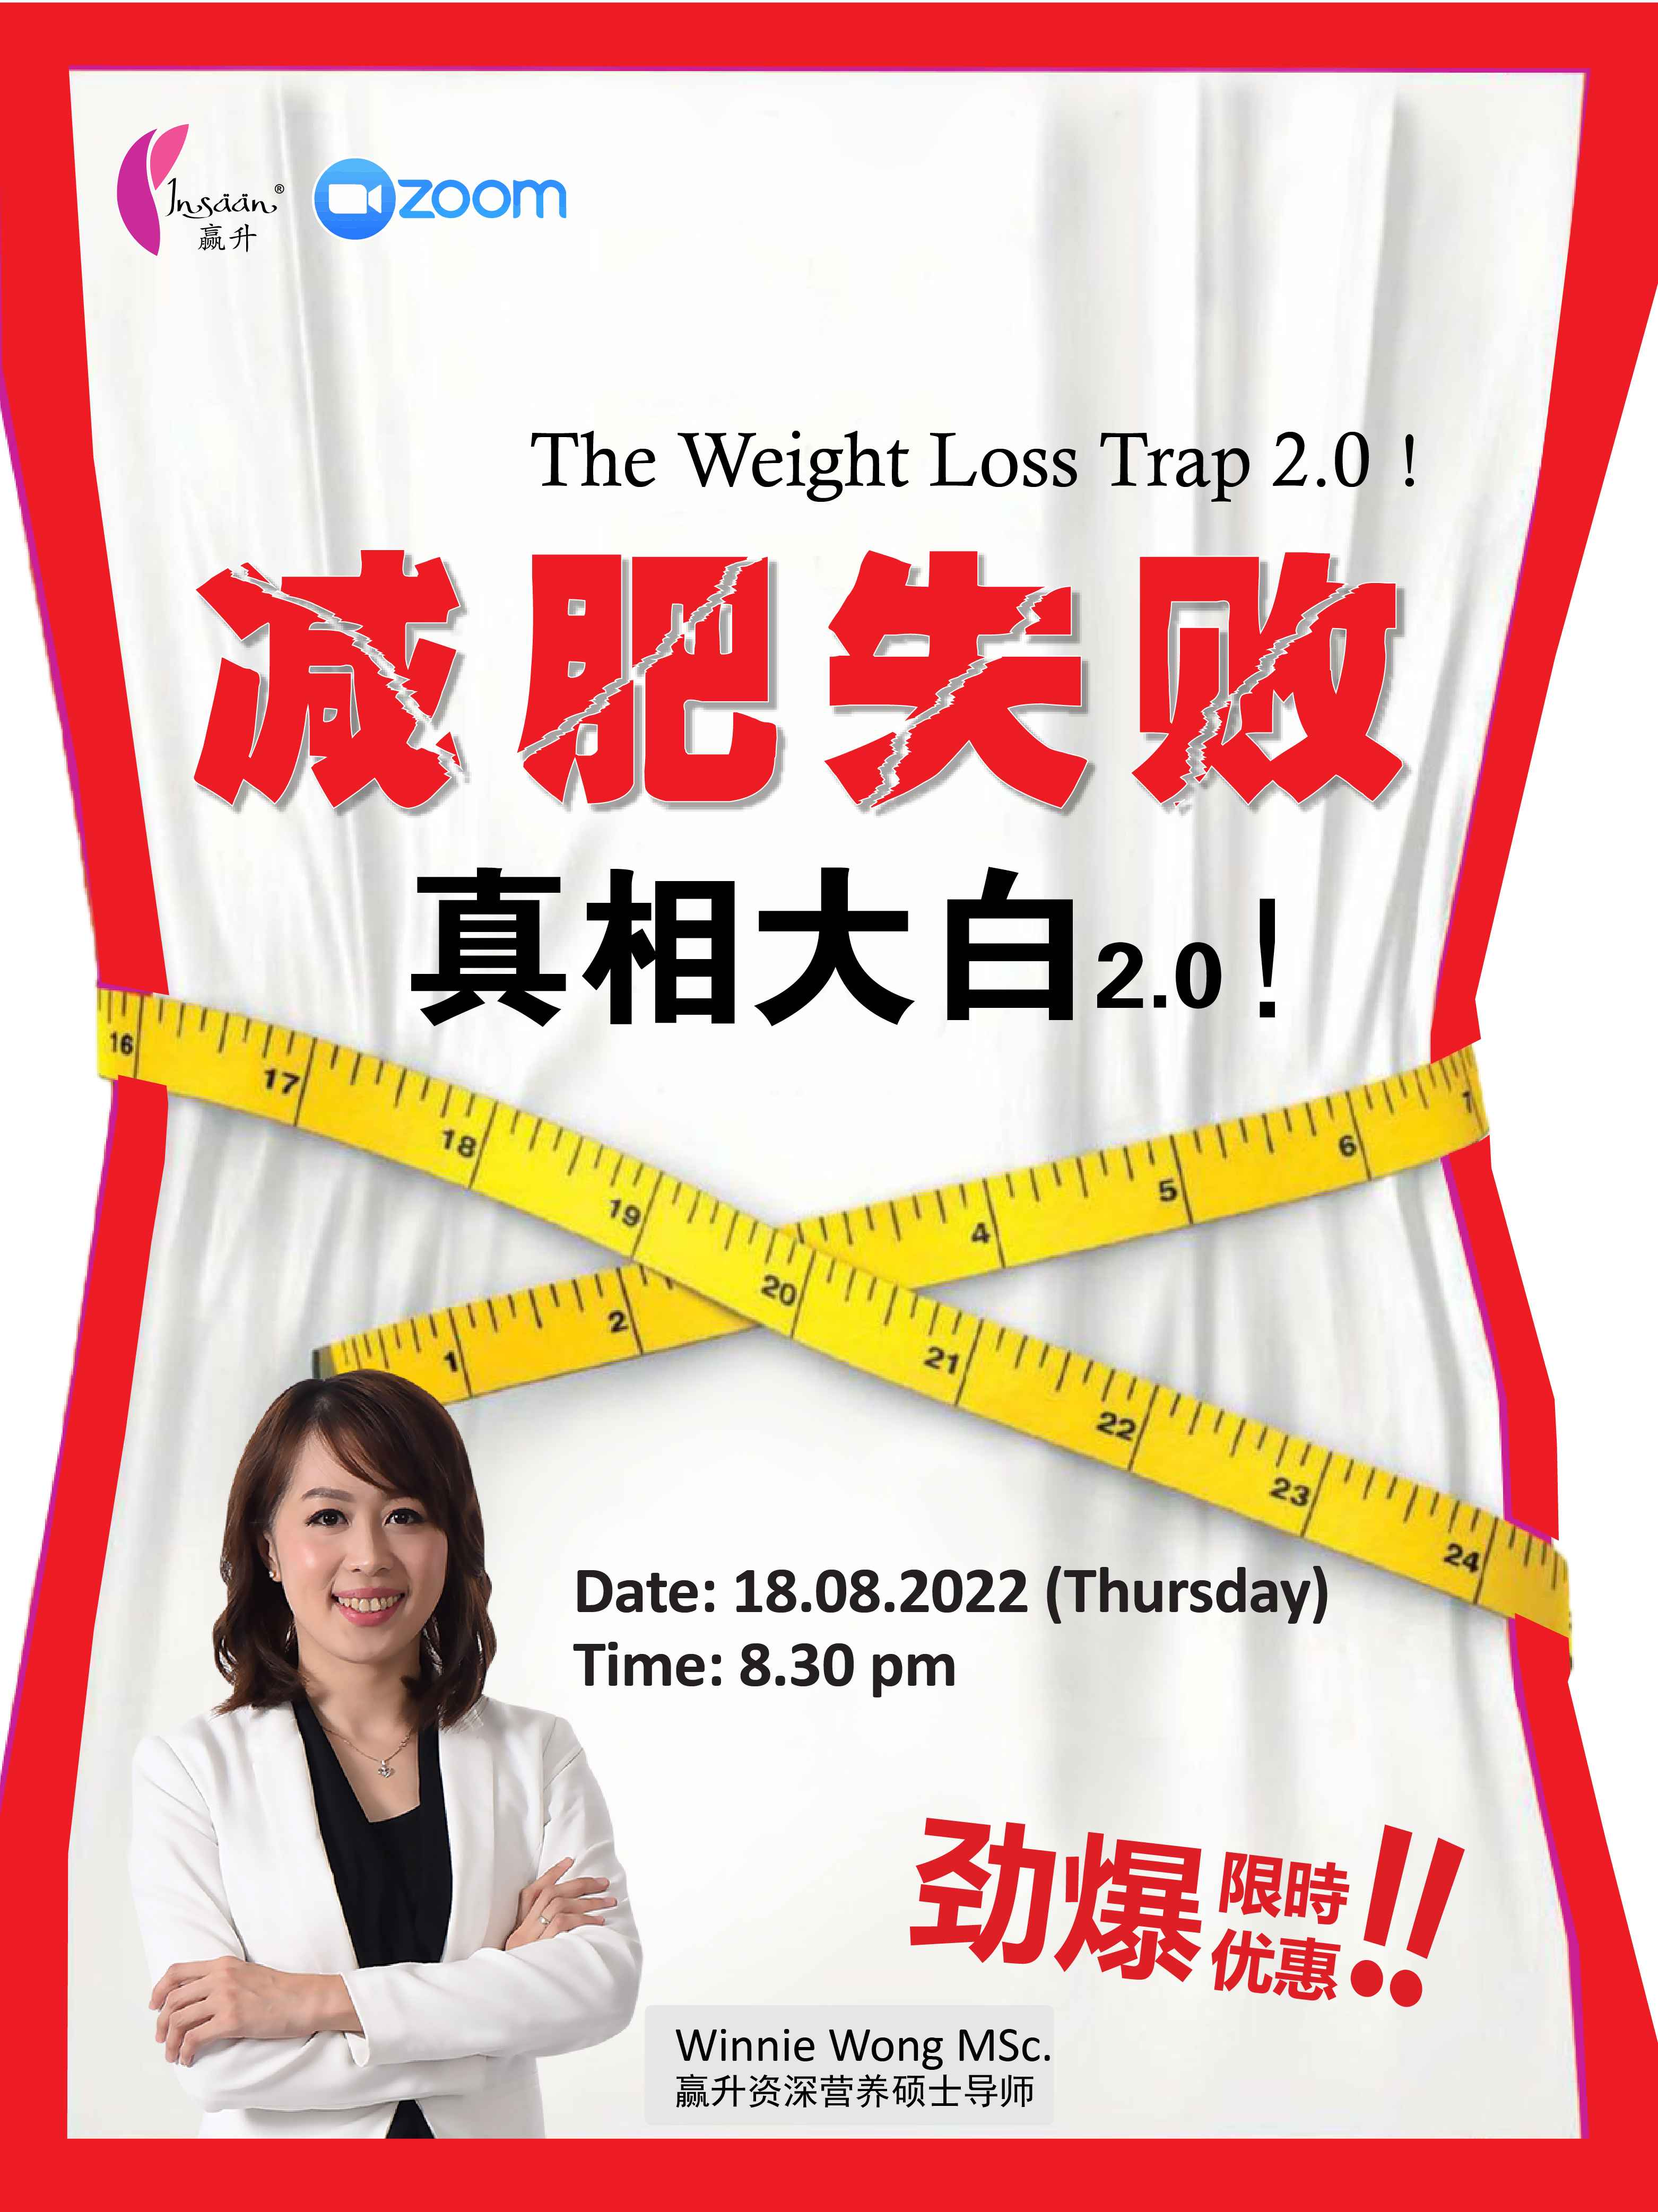 ZOOM POSTER WEIGHT LOSS 2